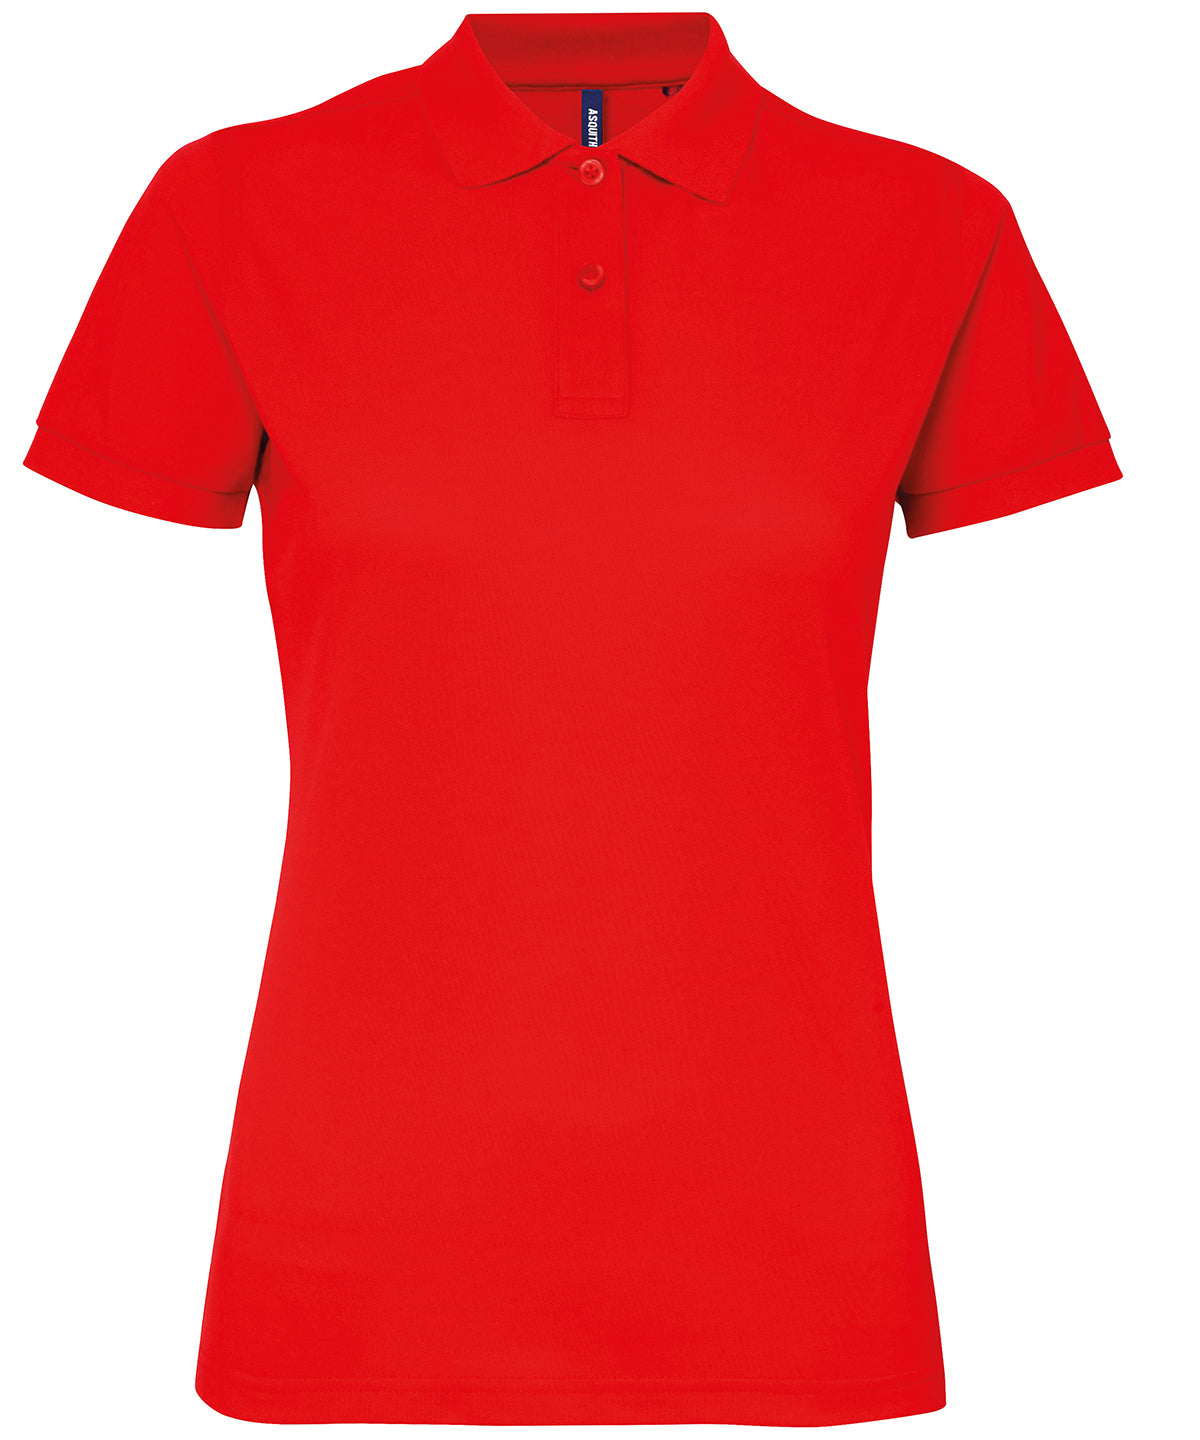 Personalised Polo Shirts - Sapphire Asquith & Fox Women’s polycotton blend polo